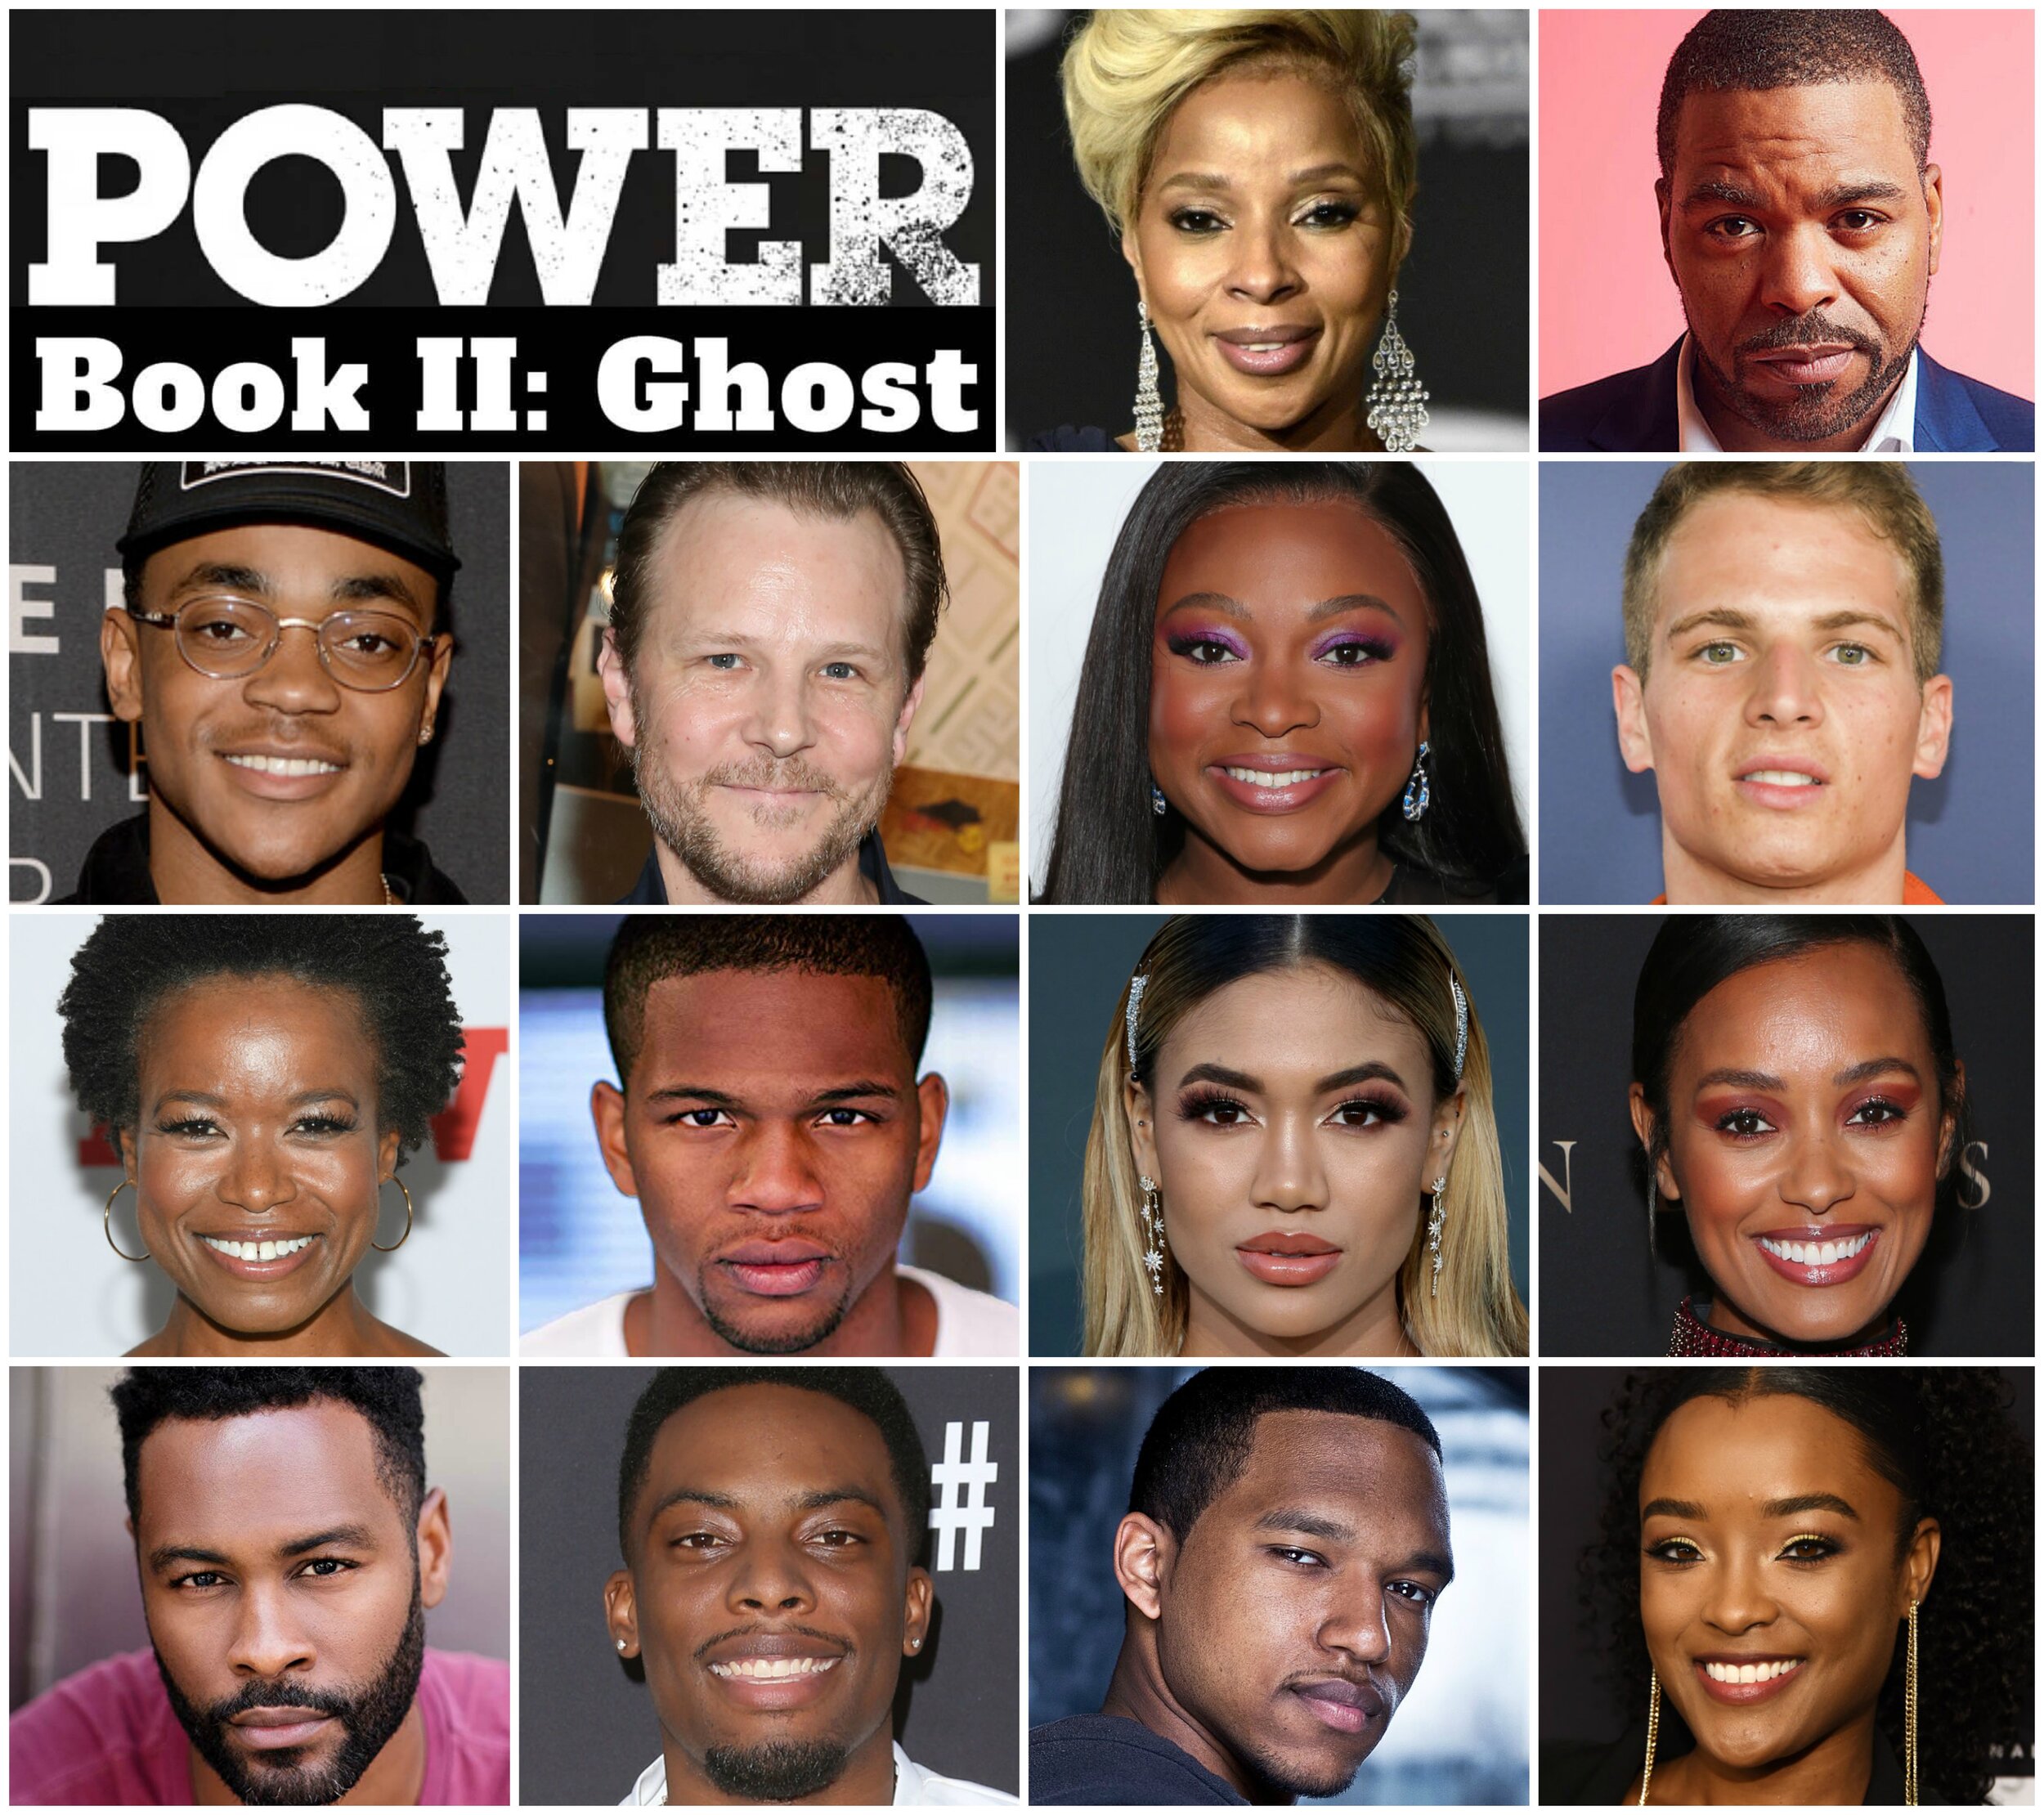 Pictures of the Cast of Power Book II: Ghost Hanging Out